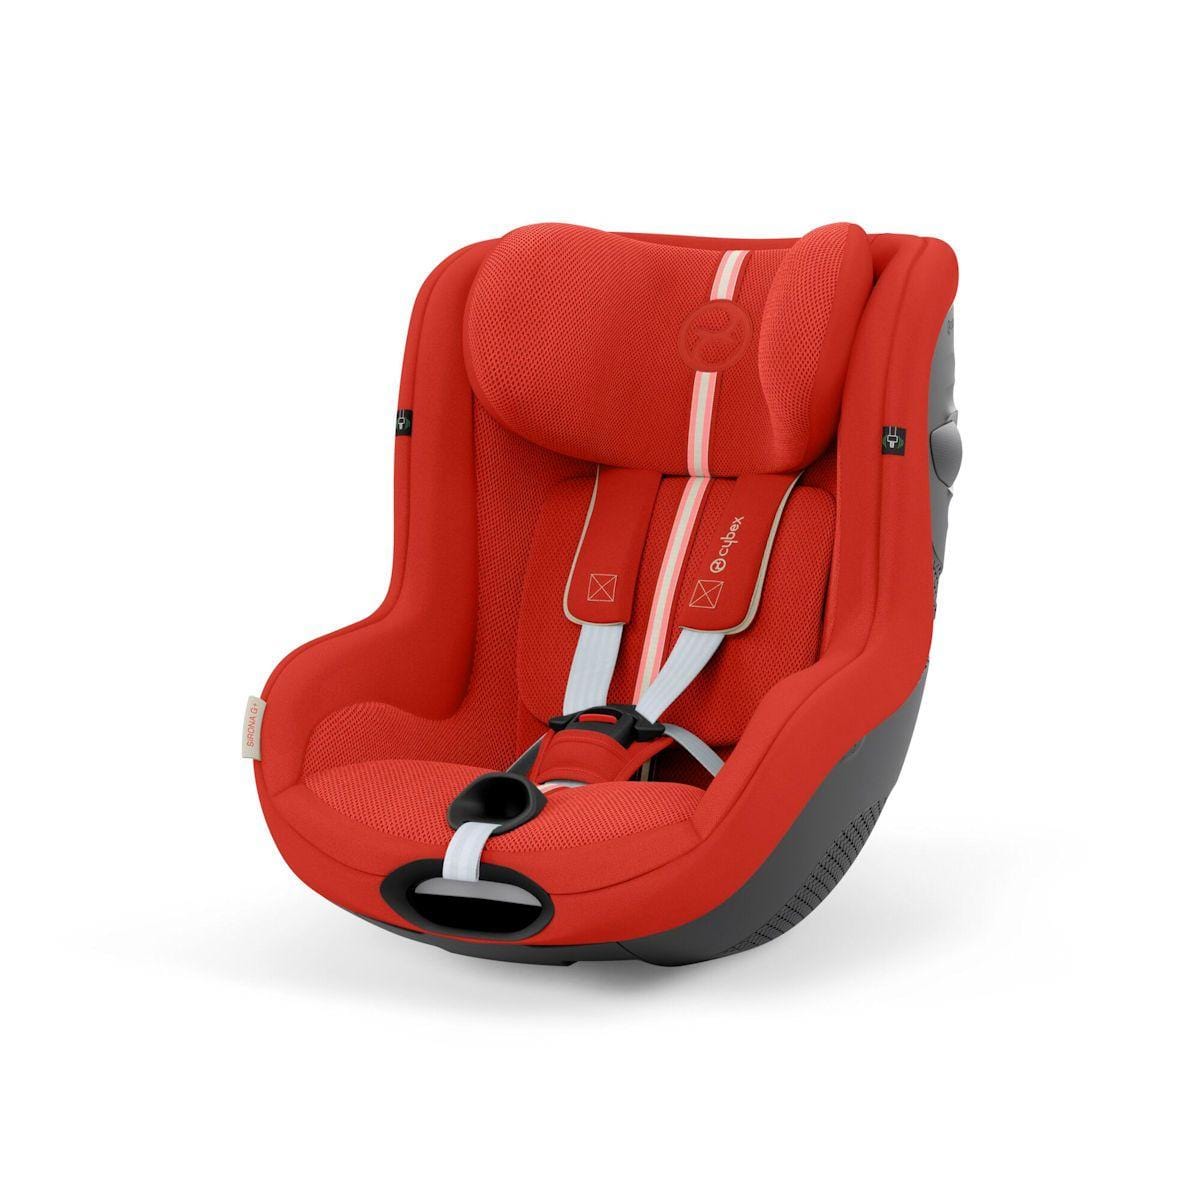 Cybex i-Size car seats Cybex Sirona G i-Size PLUS in Hibiscus Red